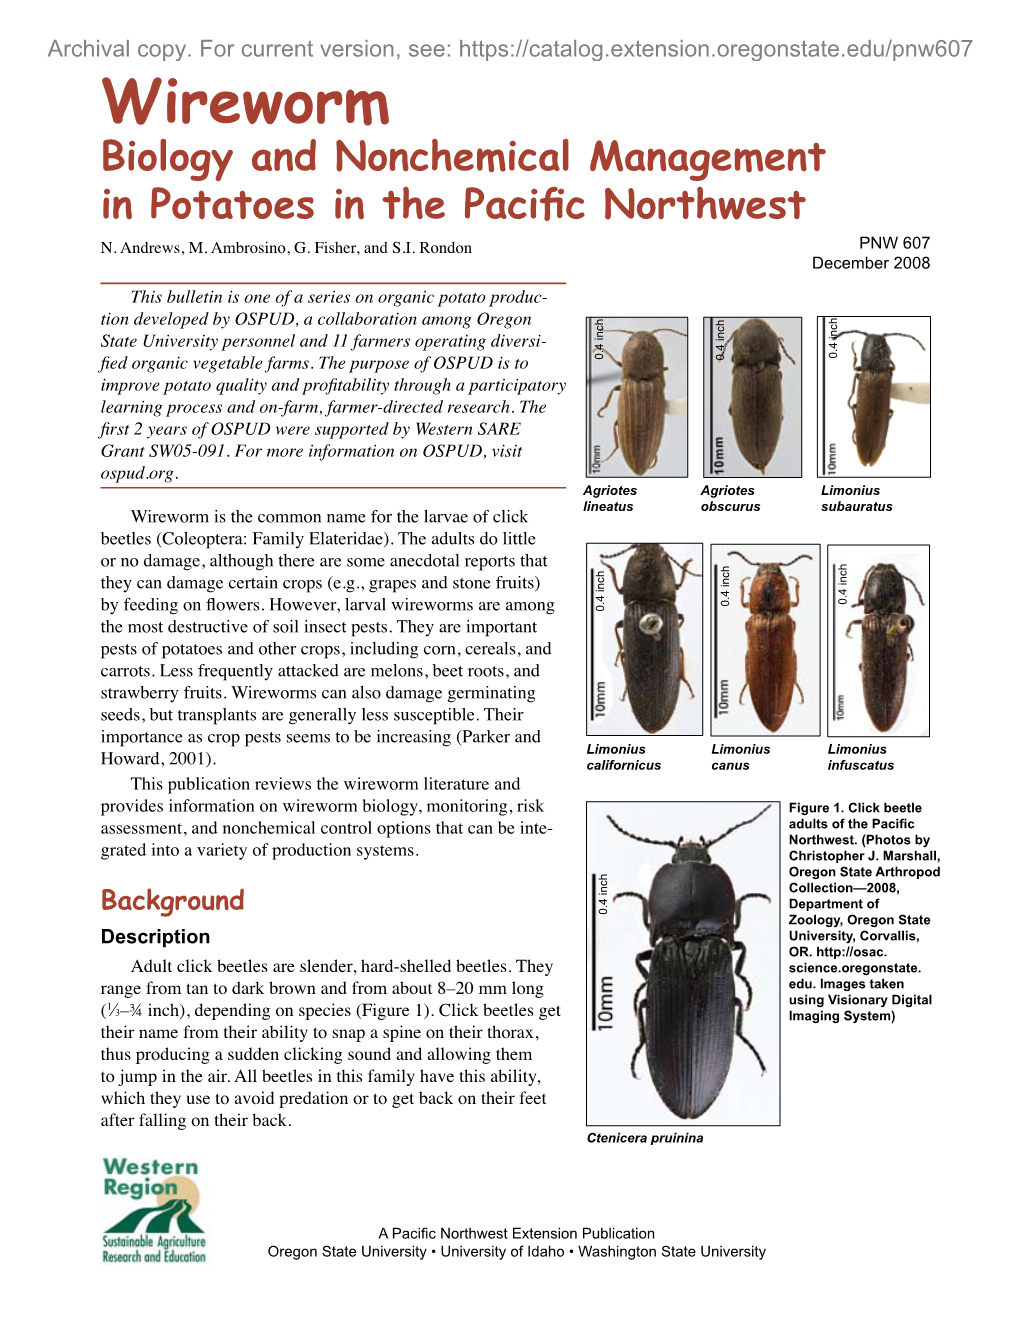 Wireworm Biology and Nonchemical Management in Potatoes in the Pacific Northwest N